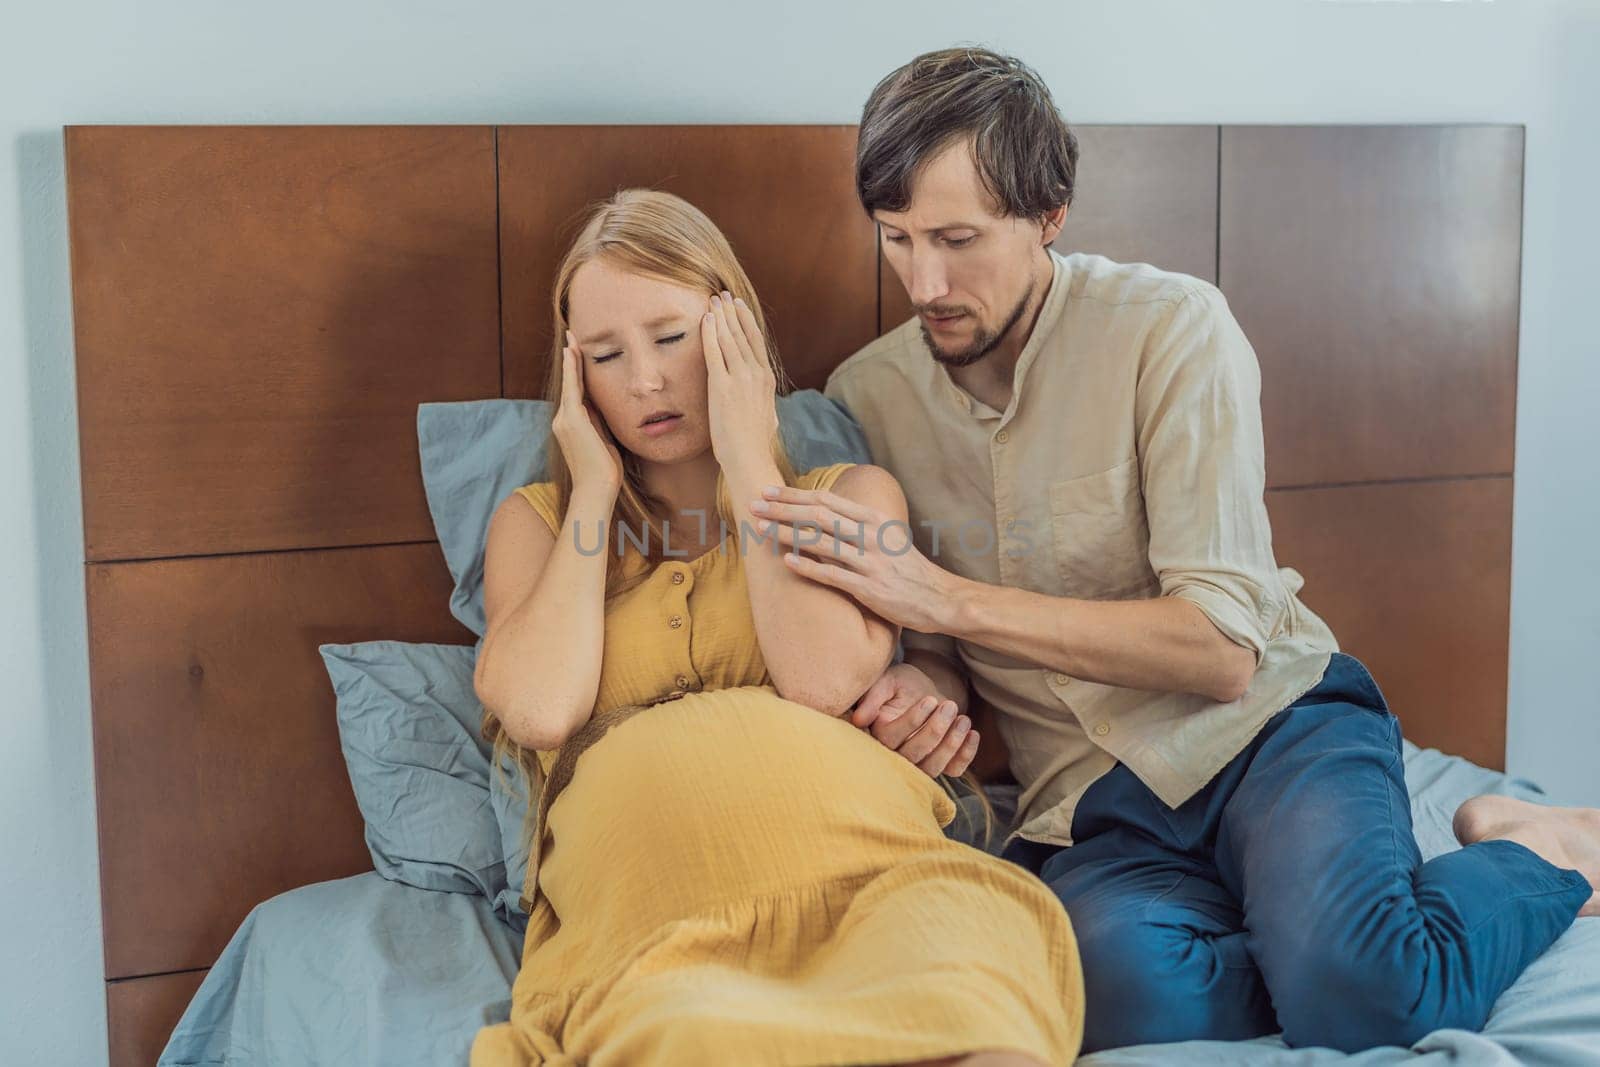 Expectant woman feels unwell, husband comforts and reassures her during a challenging pregnancy.